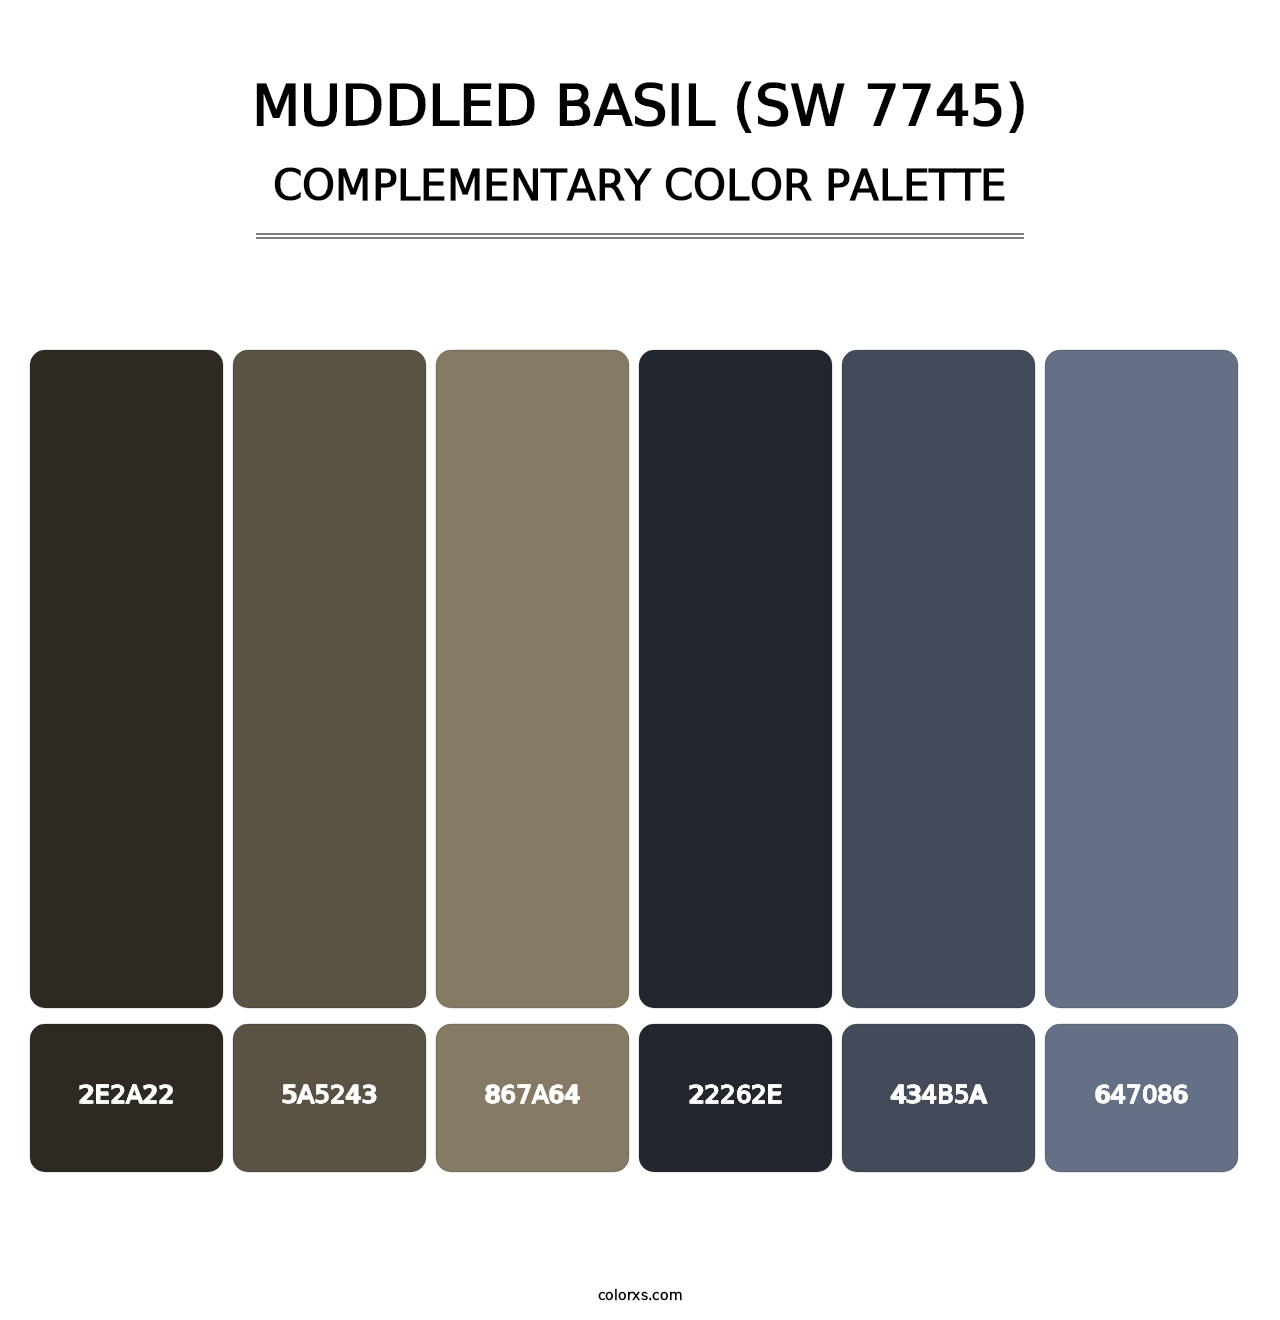 Muddled Basil (SW 7745) - Complementary Color Palette